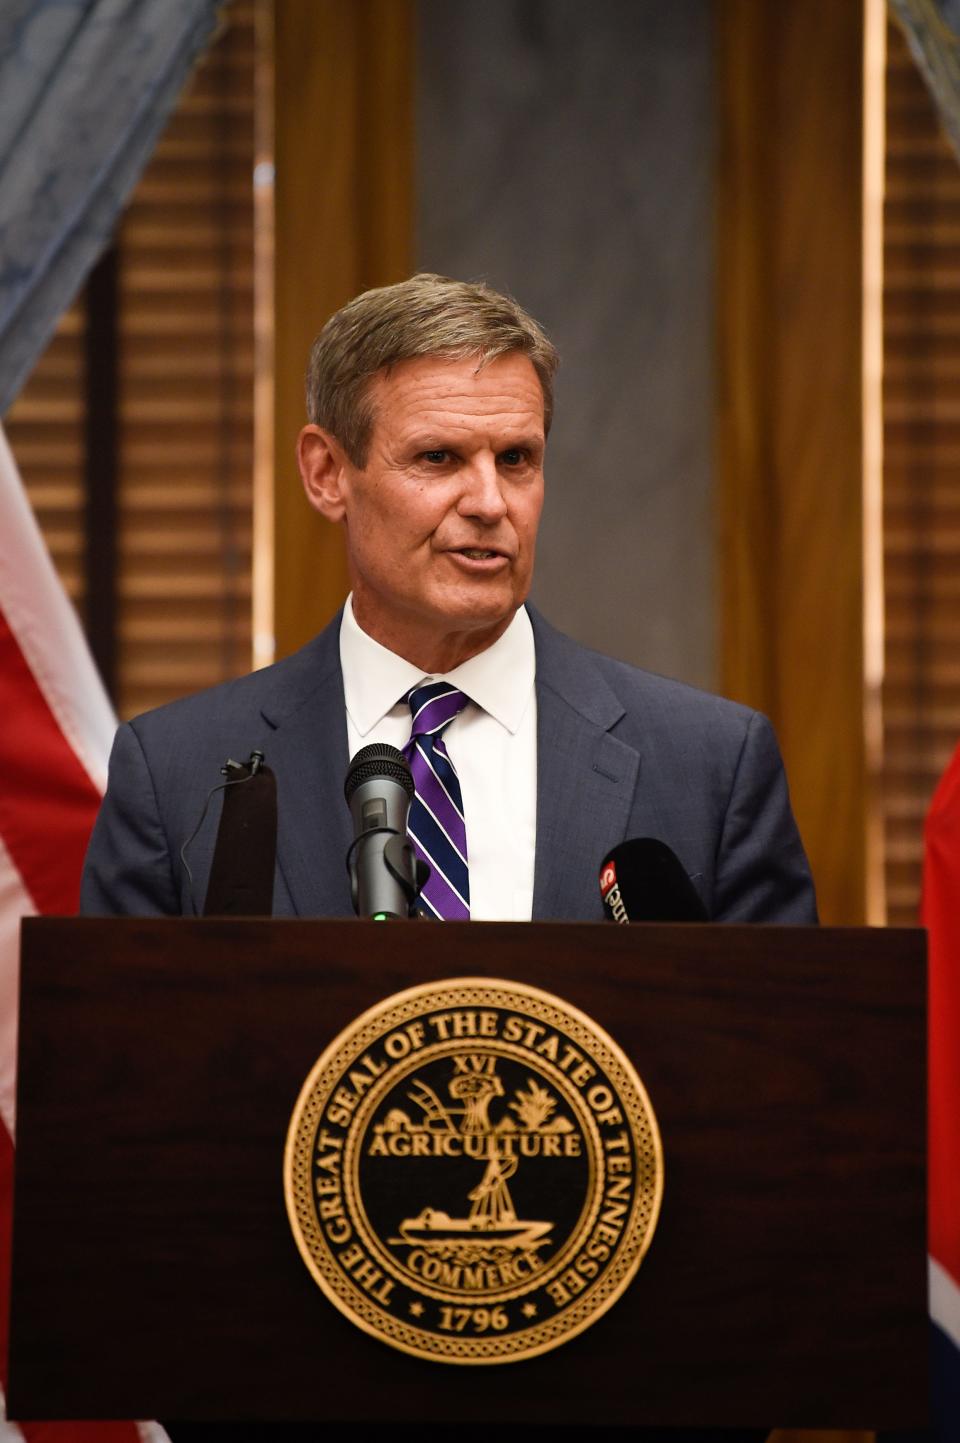 Gov. Bill Lee pictured during a news conference at the Tennessee State Capitol in Nashville, Tenn. on Aug. 16, 2021. The 2019 Education Savings Account Act was the centerpiece of Lee's 2019 legislative agenda.